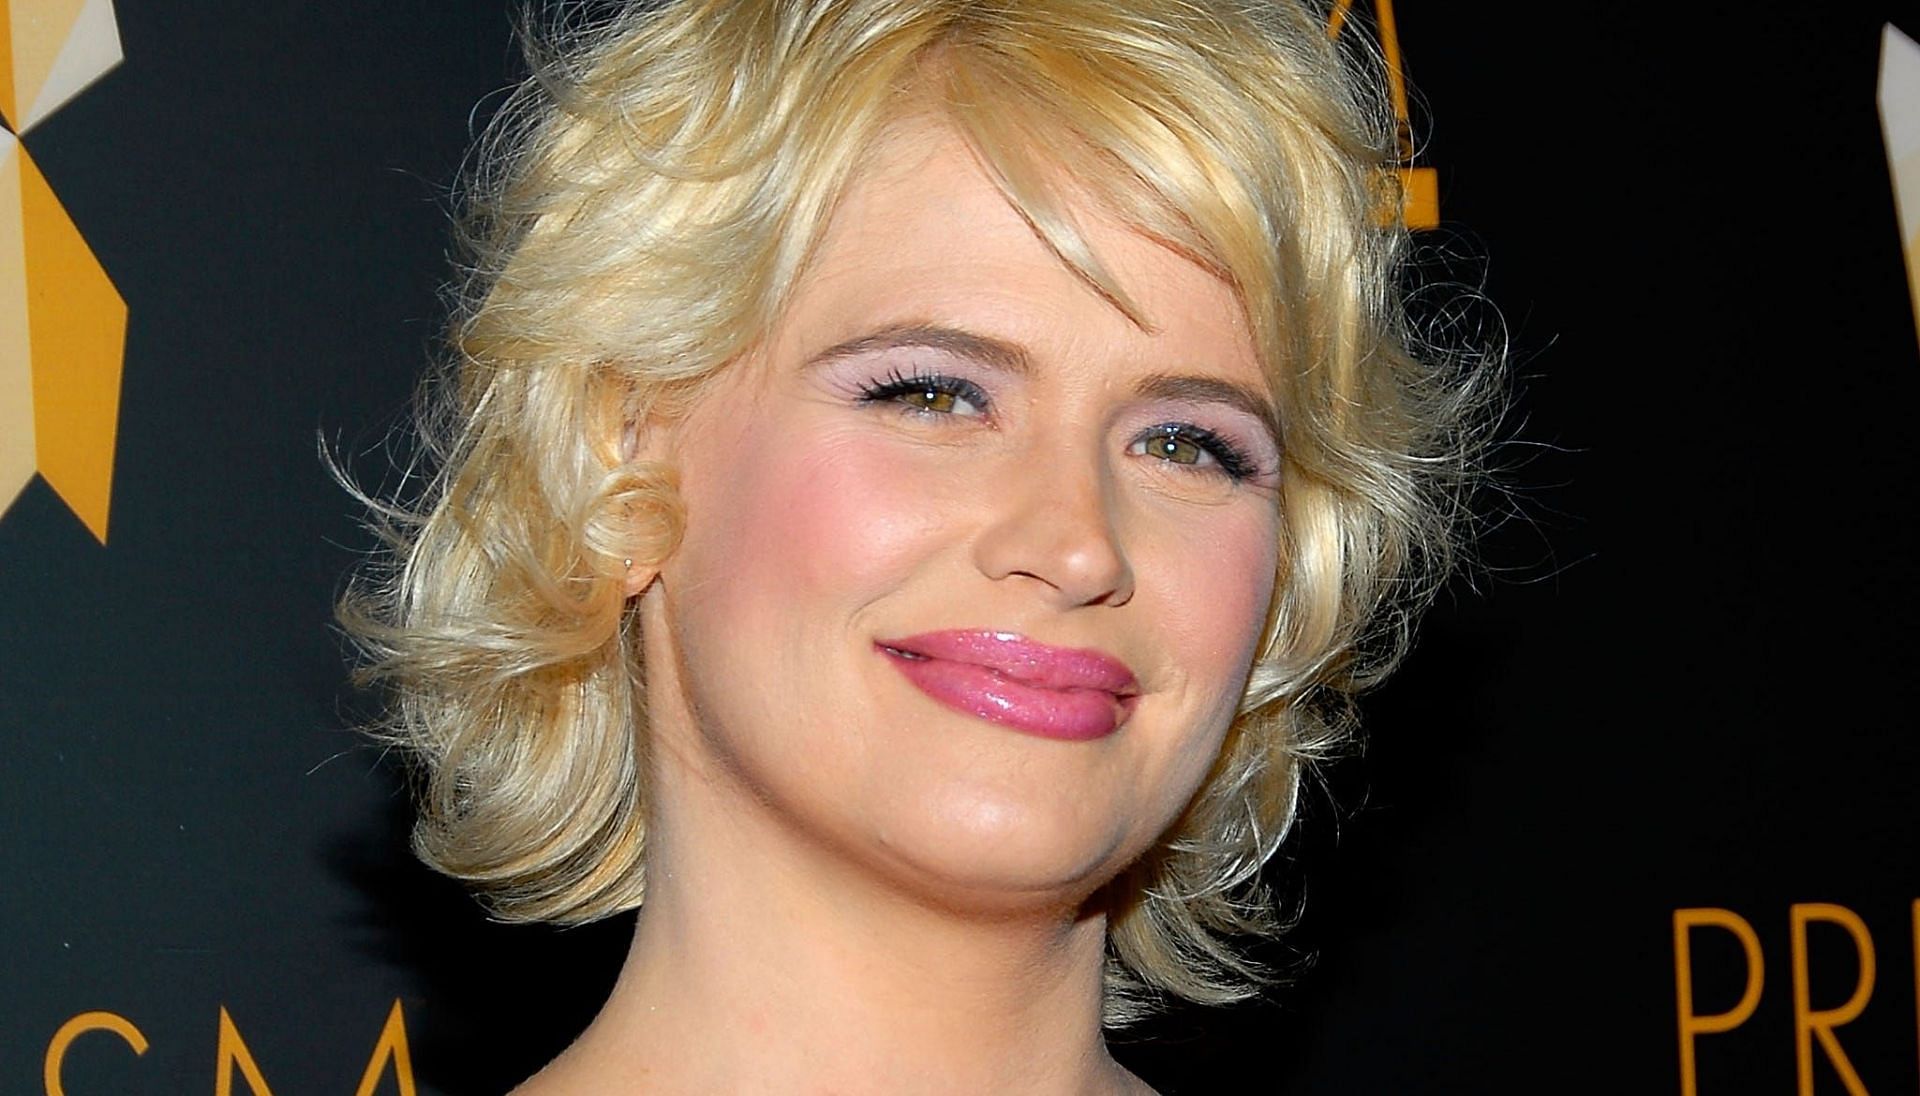 Kristy Swanson has been diagnosed with COVID-related pneumonia after consistent criticism of vaccine mandates (Image via Getty Images)